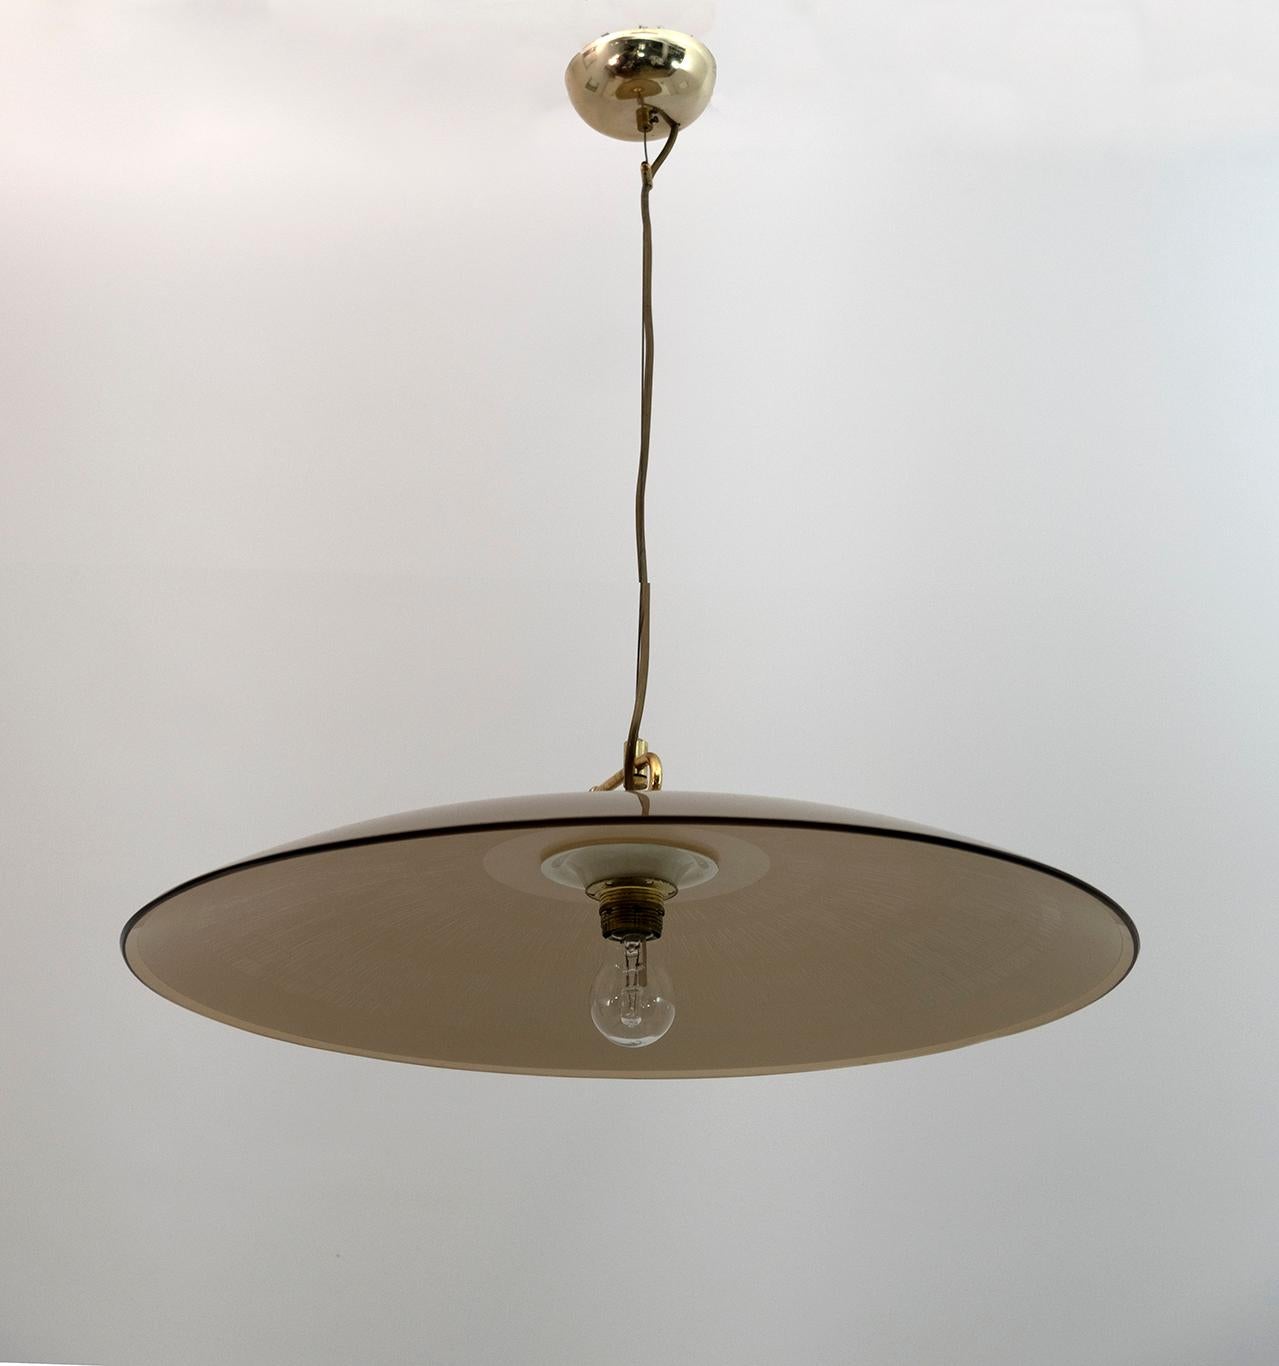 Suspension lamp in bronzed Murano glass, with brass details.